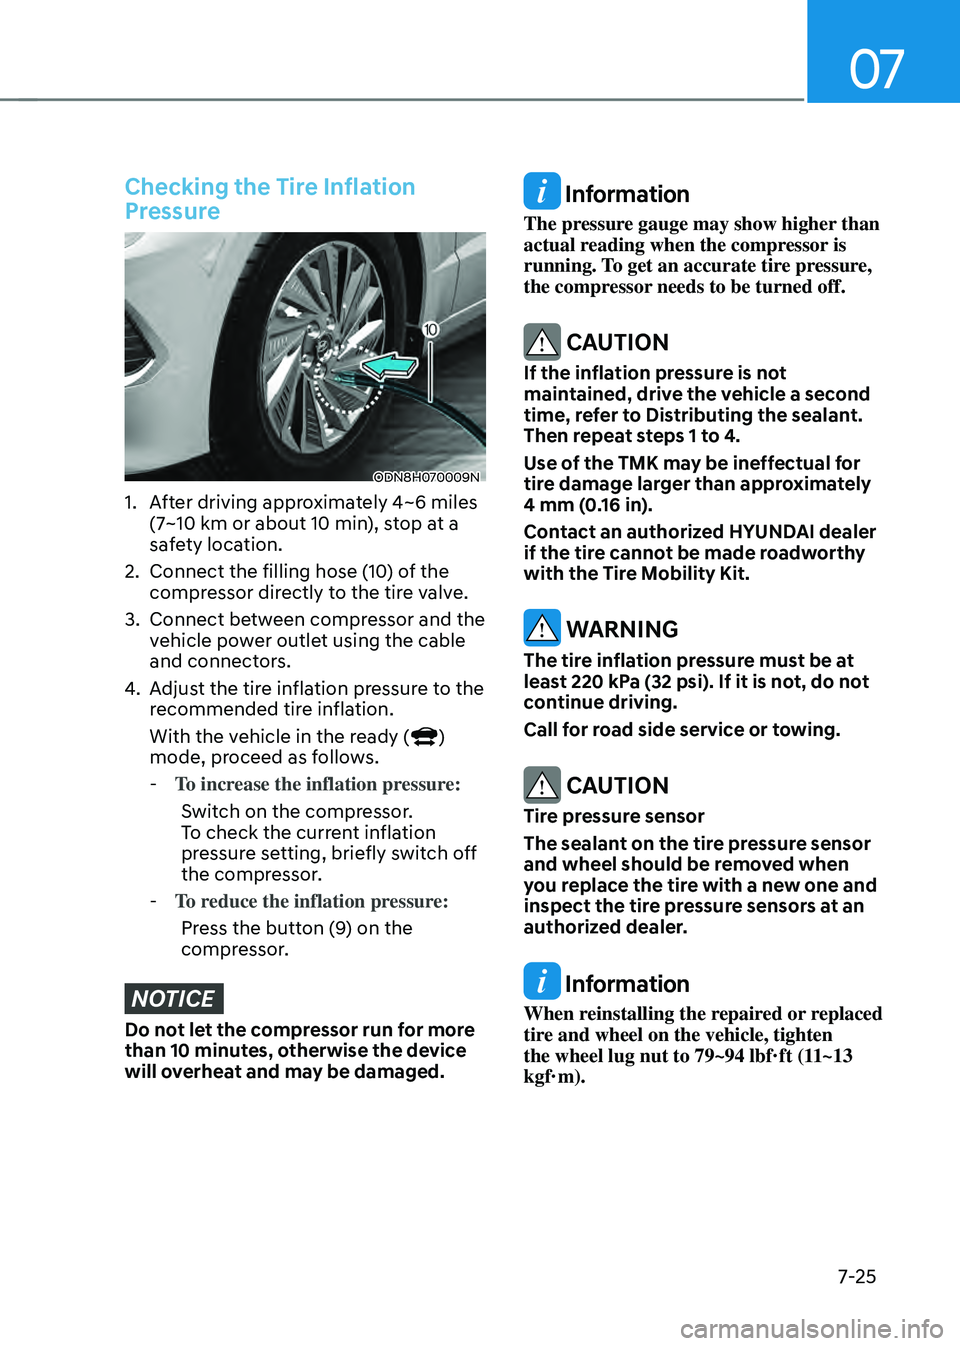 HYUNDAI SONATA HYBRID 2022 Owners Guide 07
7-25
Checking the Tire Inflation 
Pressure
ODN8H070009N
1. After driving approximately 4~6 miles 
(7~10 km or about 10 min), stop at a 
safety location.
2. Connect the filling hose (10) of the 
com